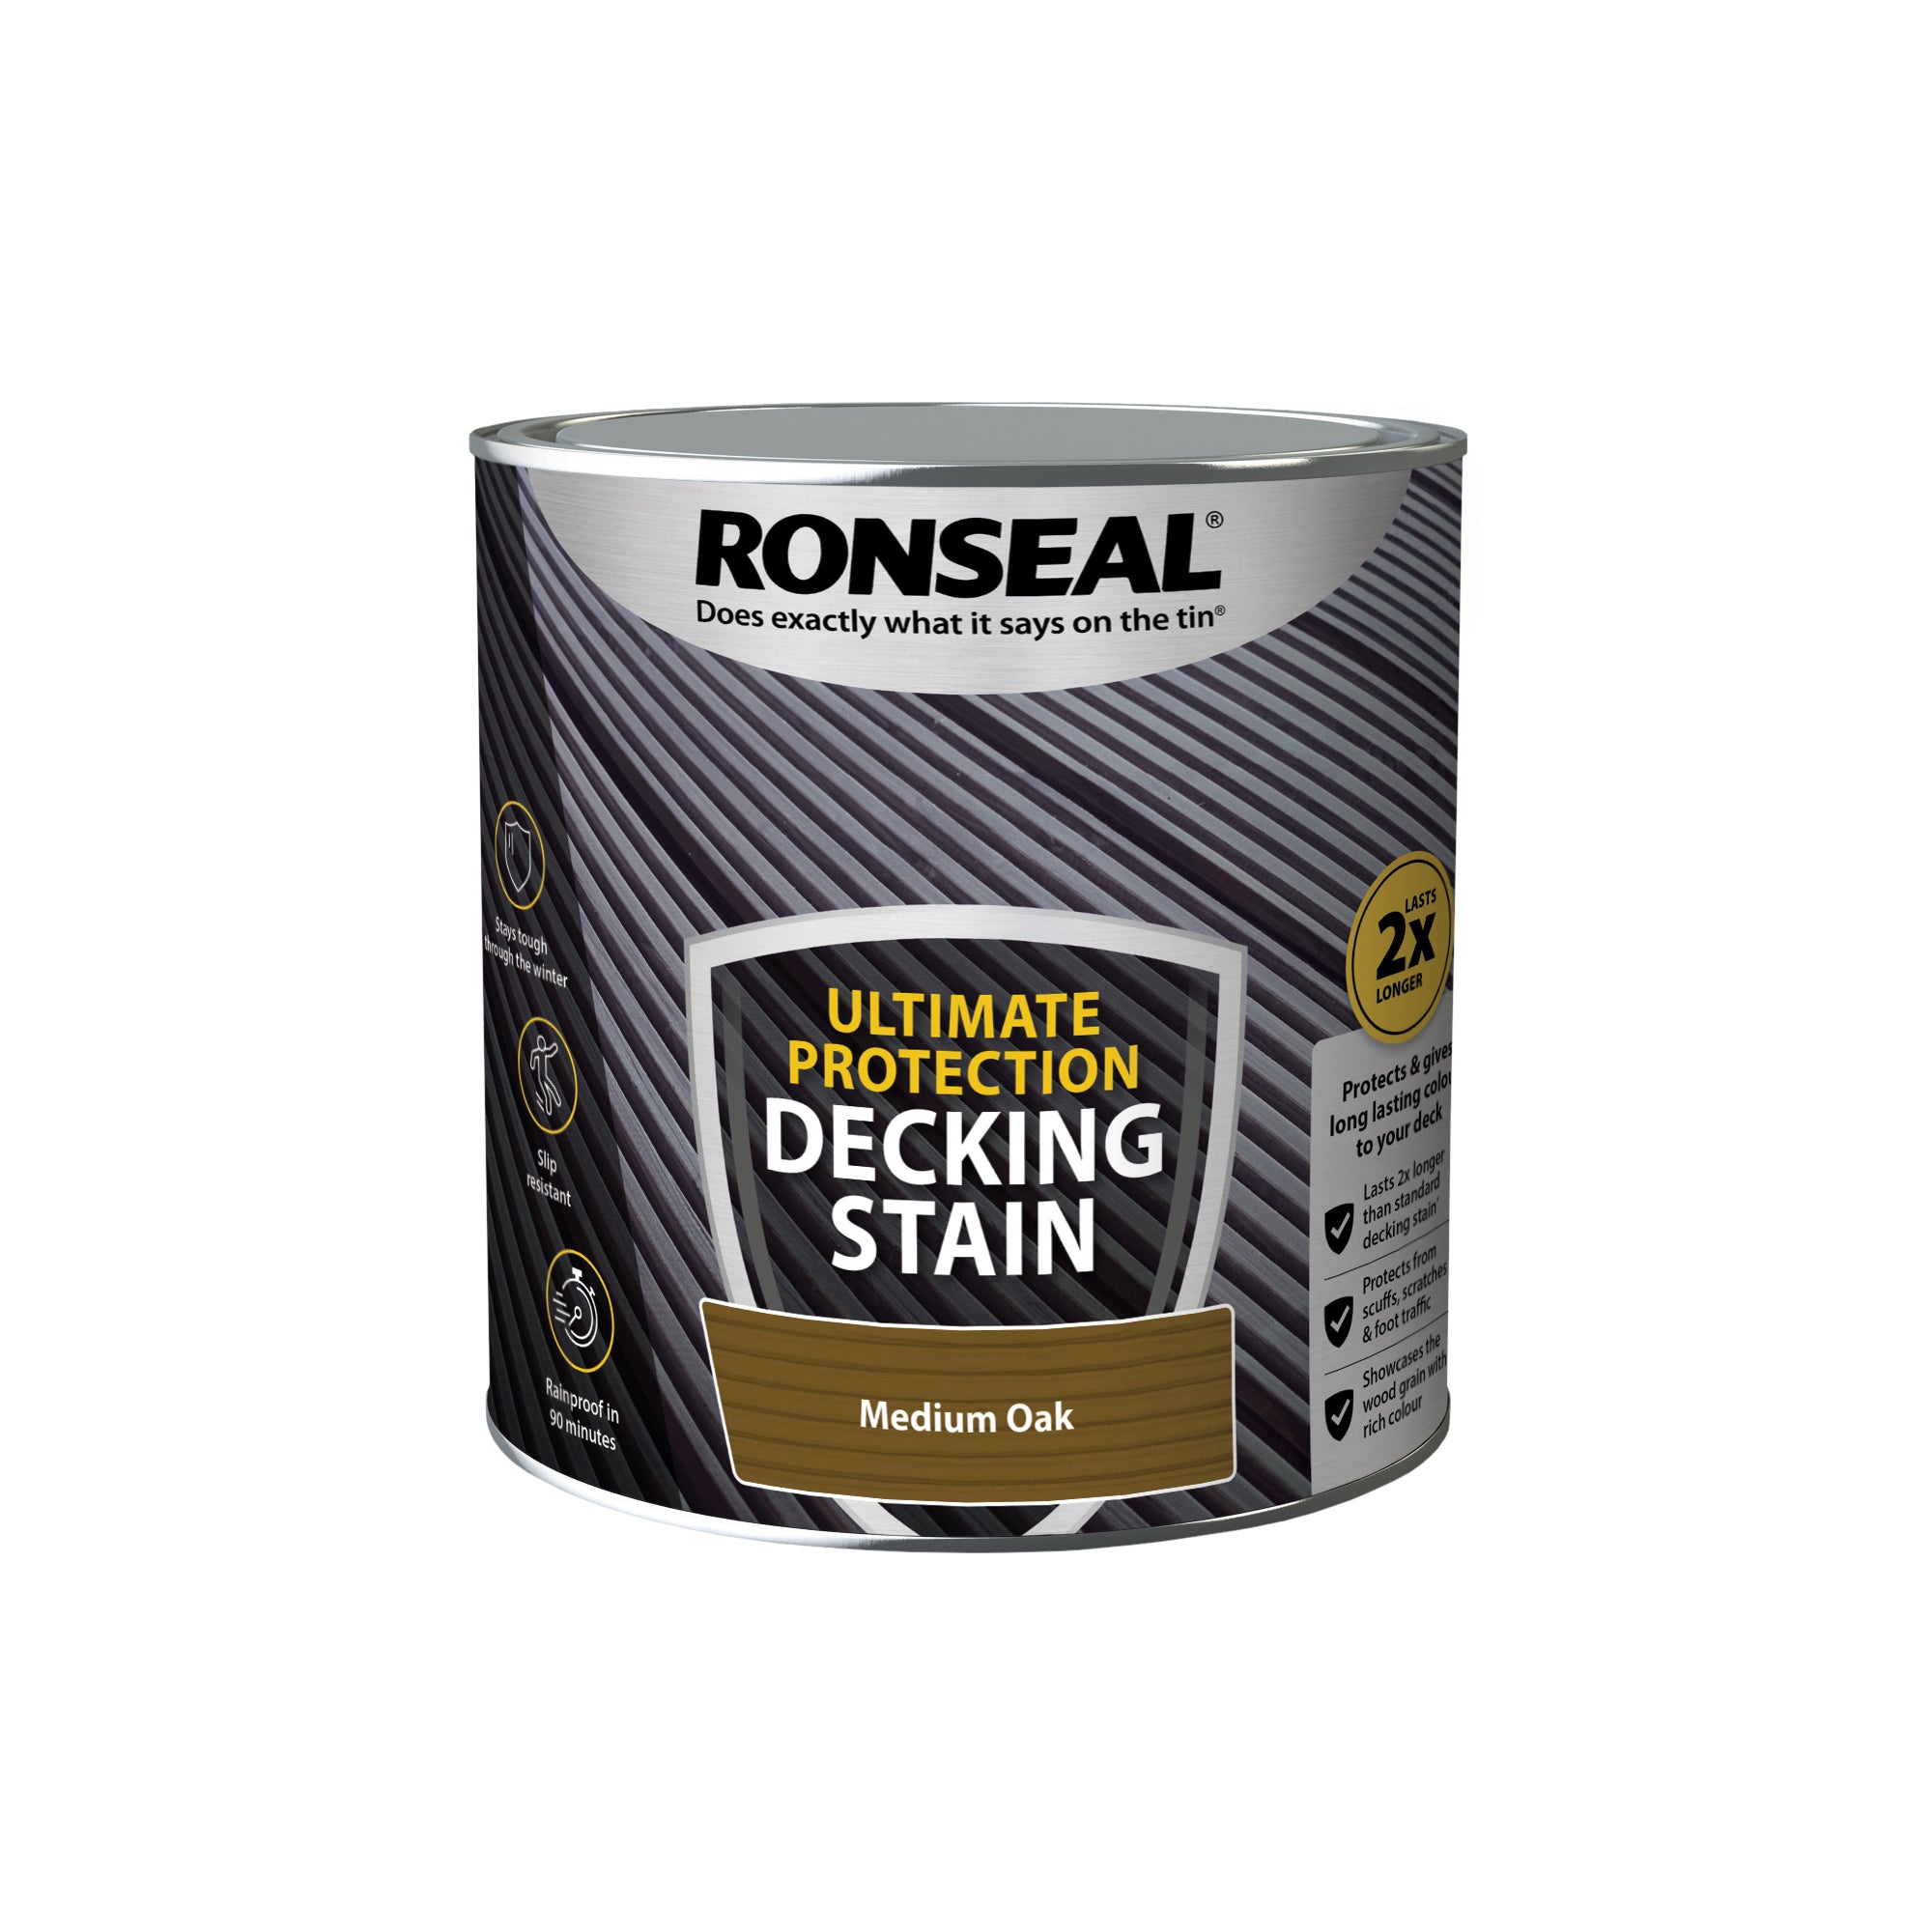 Ronseal-Ultimate-Protection-Decking-Stain-Medium-Oak-2.5L